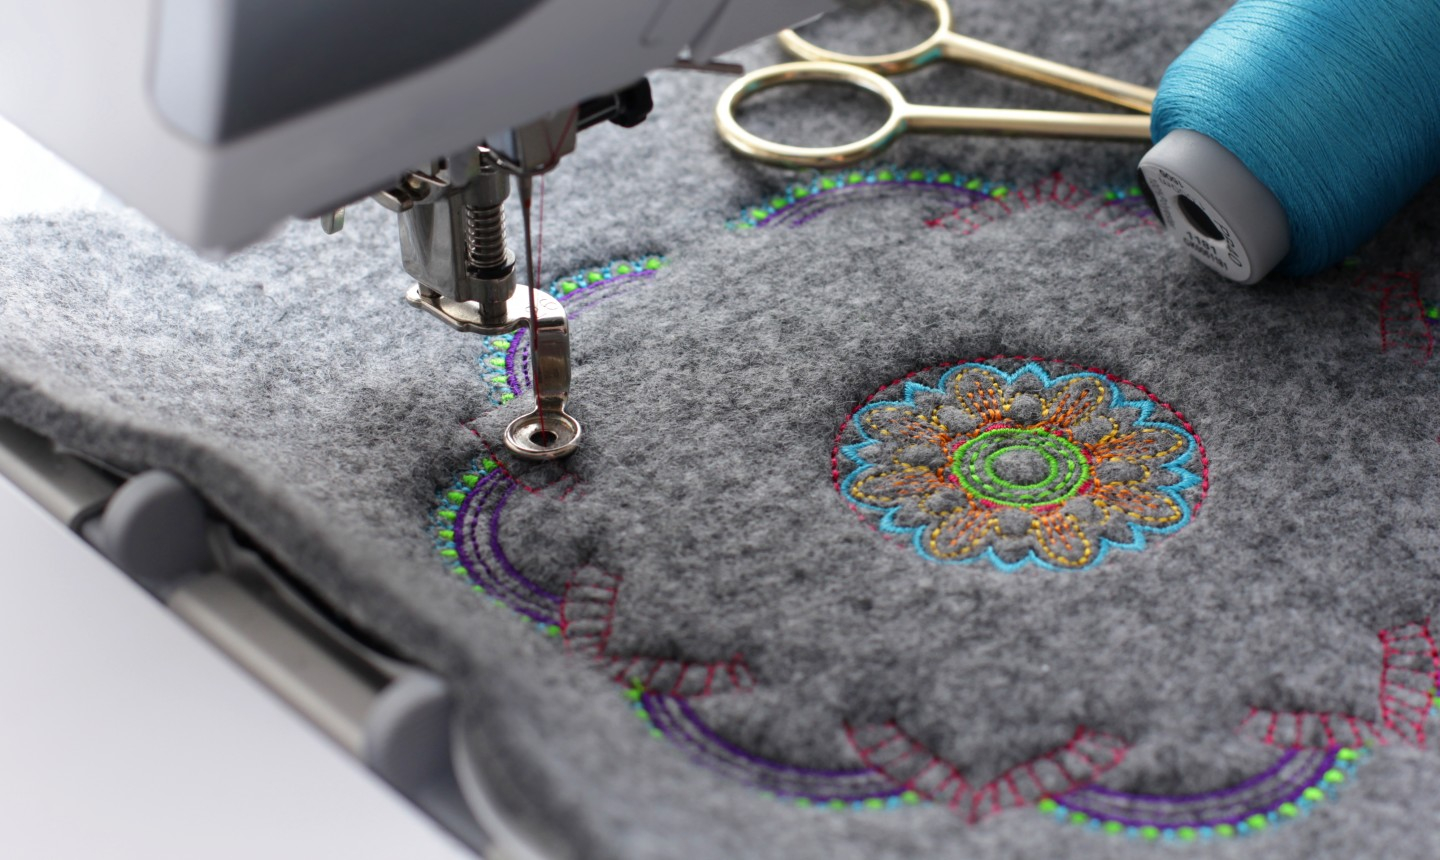 Irish Embroidery Patterns Our 7 Top Tips For Machine Embroidery Newbies